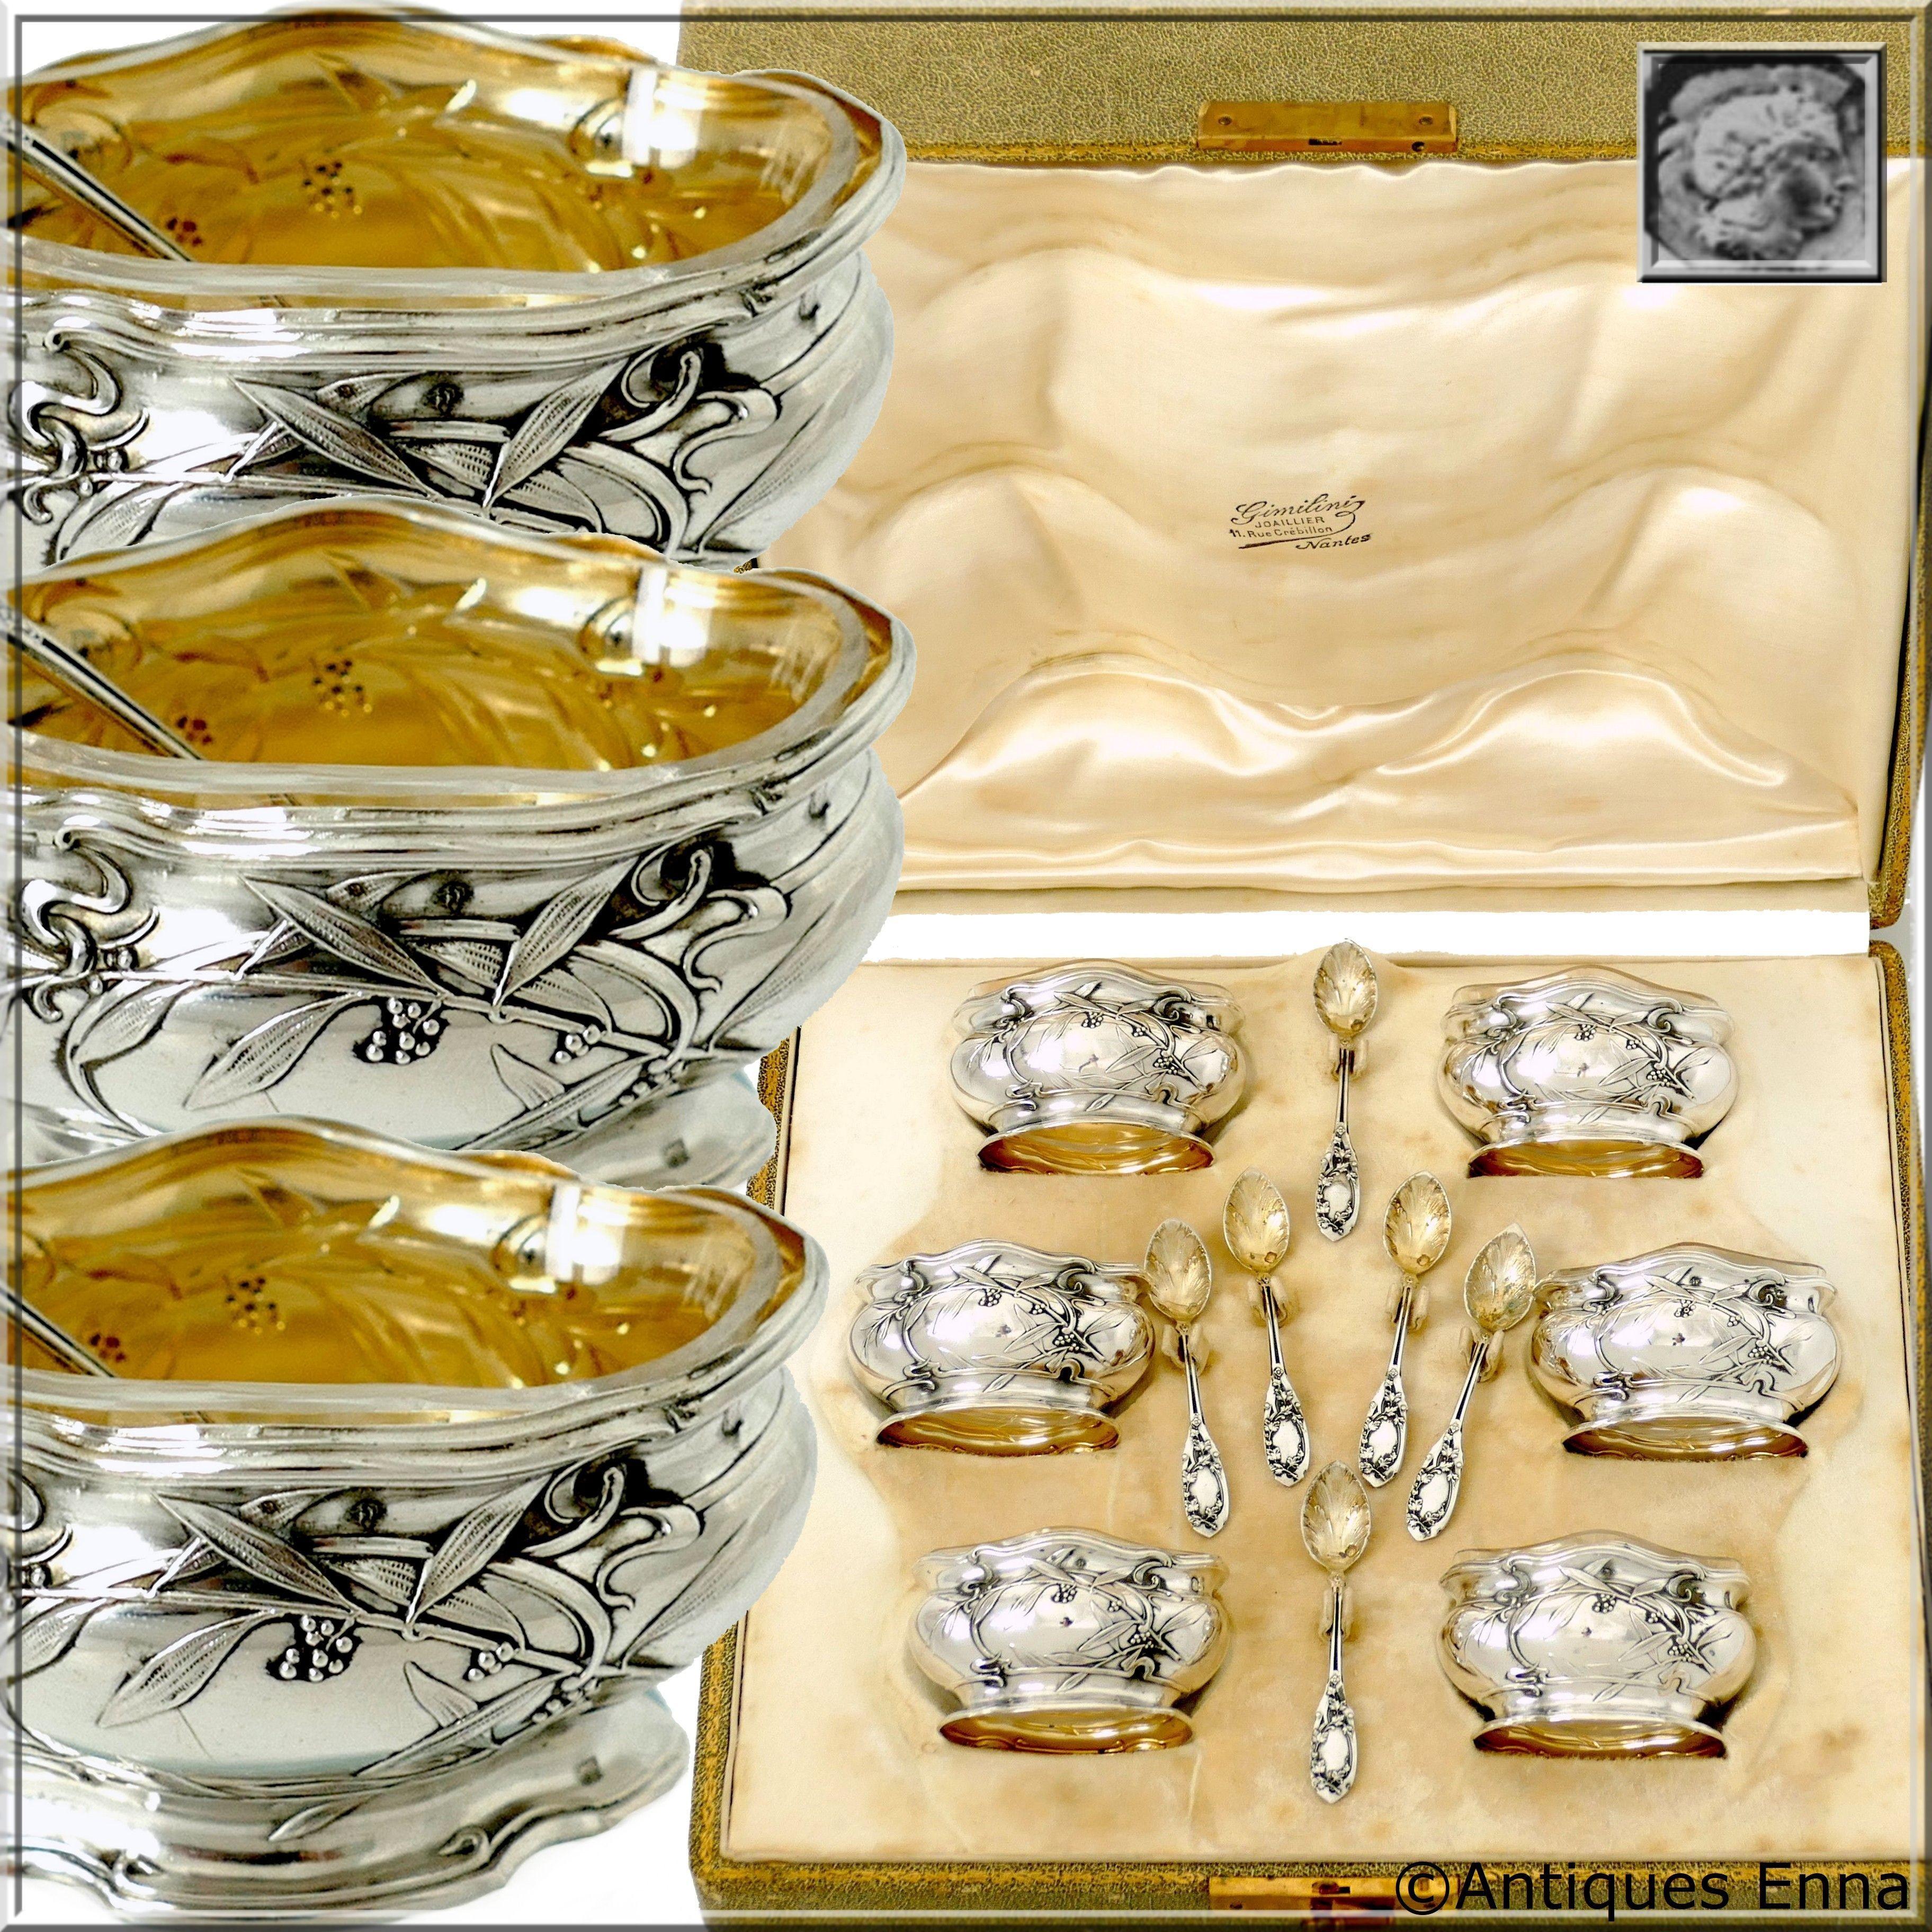 Head of Minerve 1 st titre for 950/1000 on salt cellars and spoons for 950/1000 French sterling silver vermeil guarantee. The quality of the gold used to recover sterling silver is a minimum of 750 mils (18K).

Rare French sterling silver salt